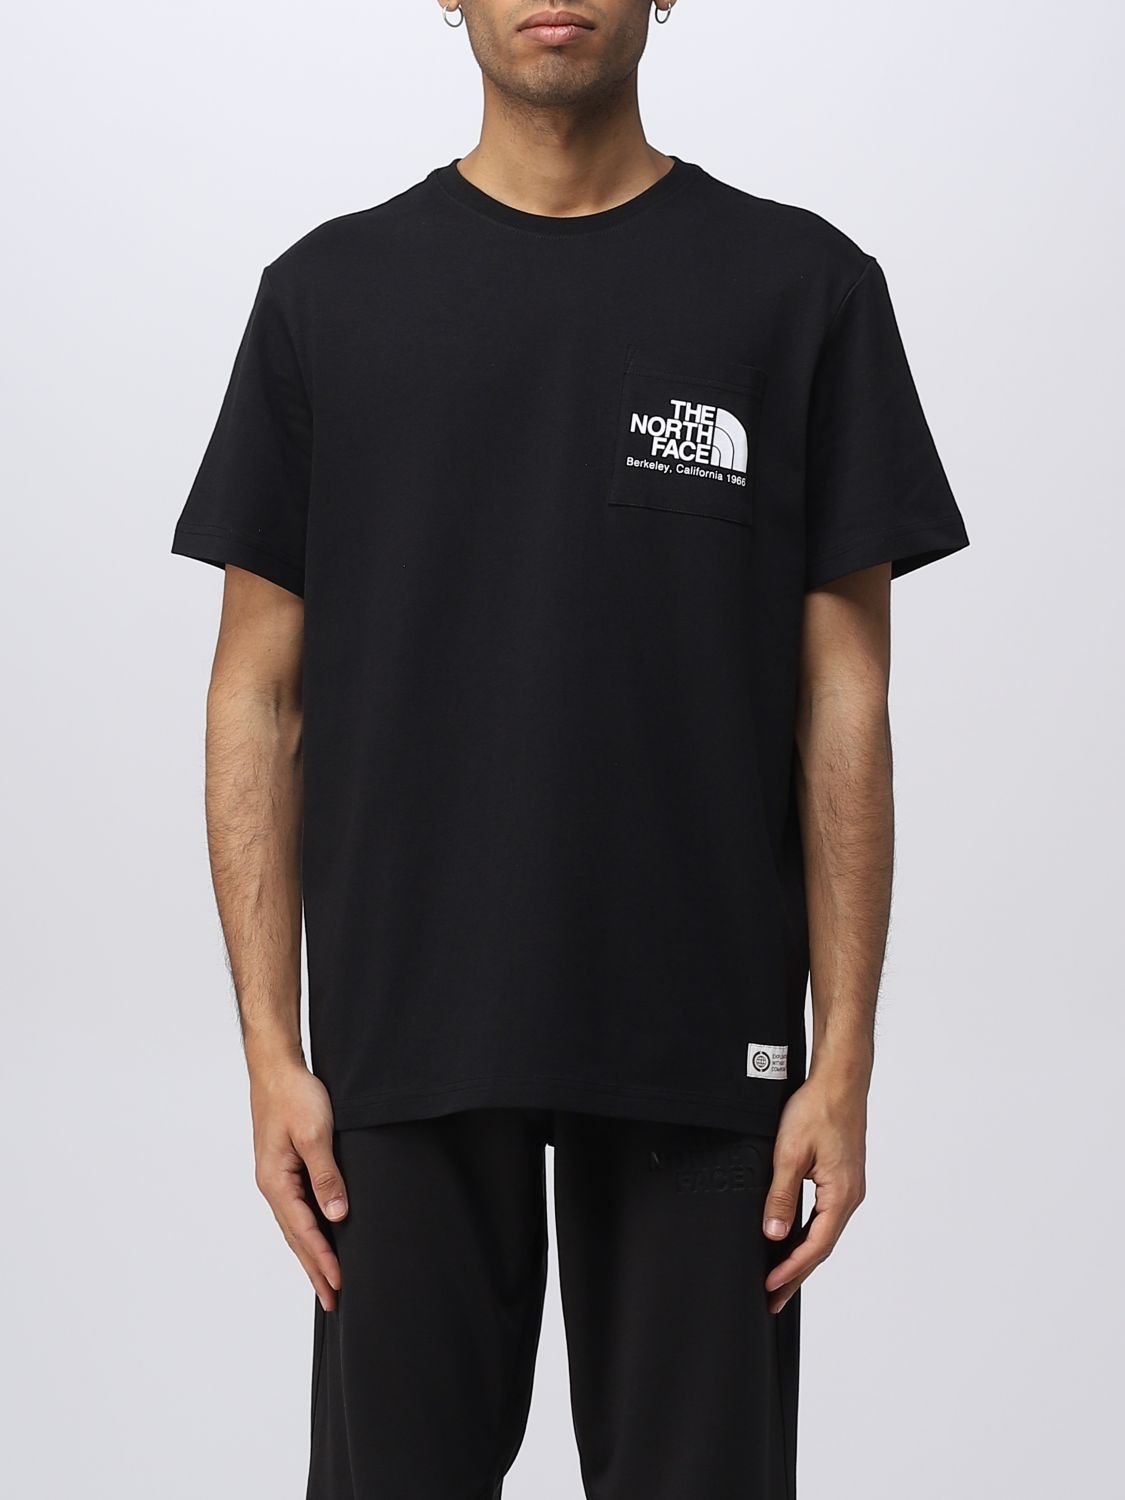 THE NORTH FACE T-SHIRT THE NORTH FACE MEN,381519002